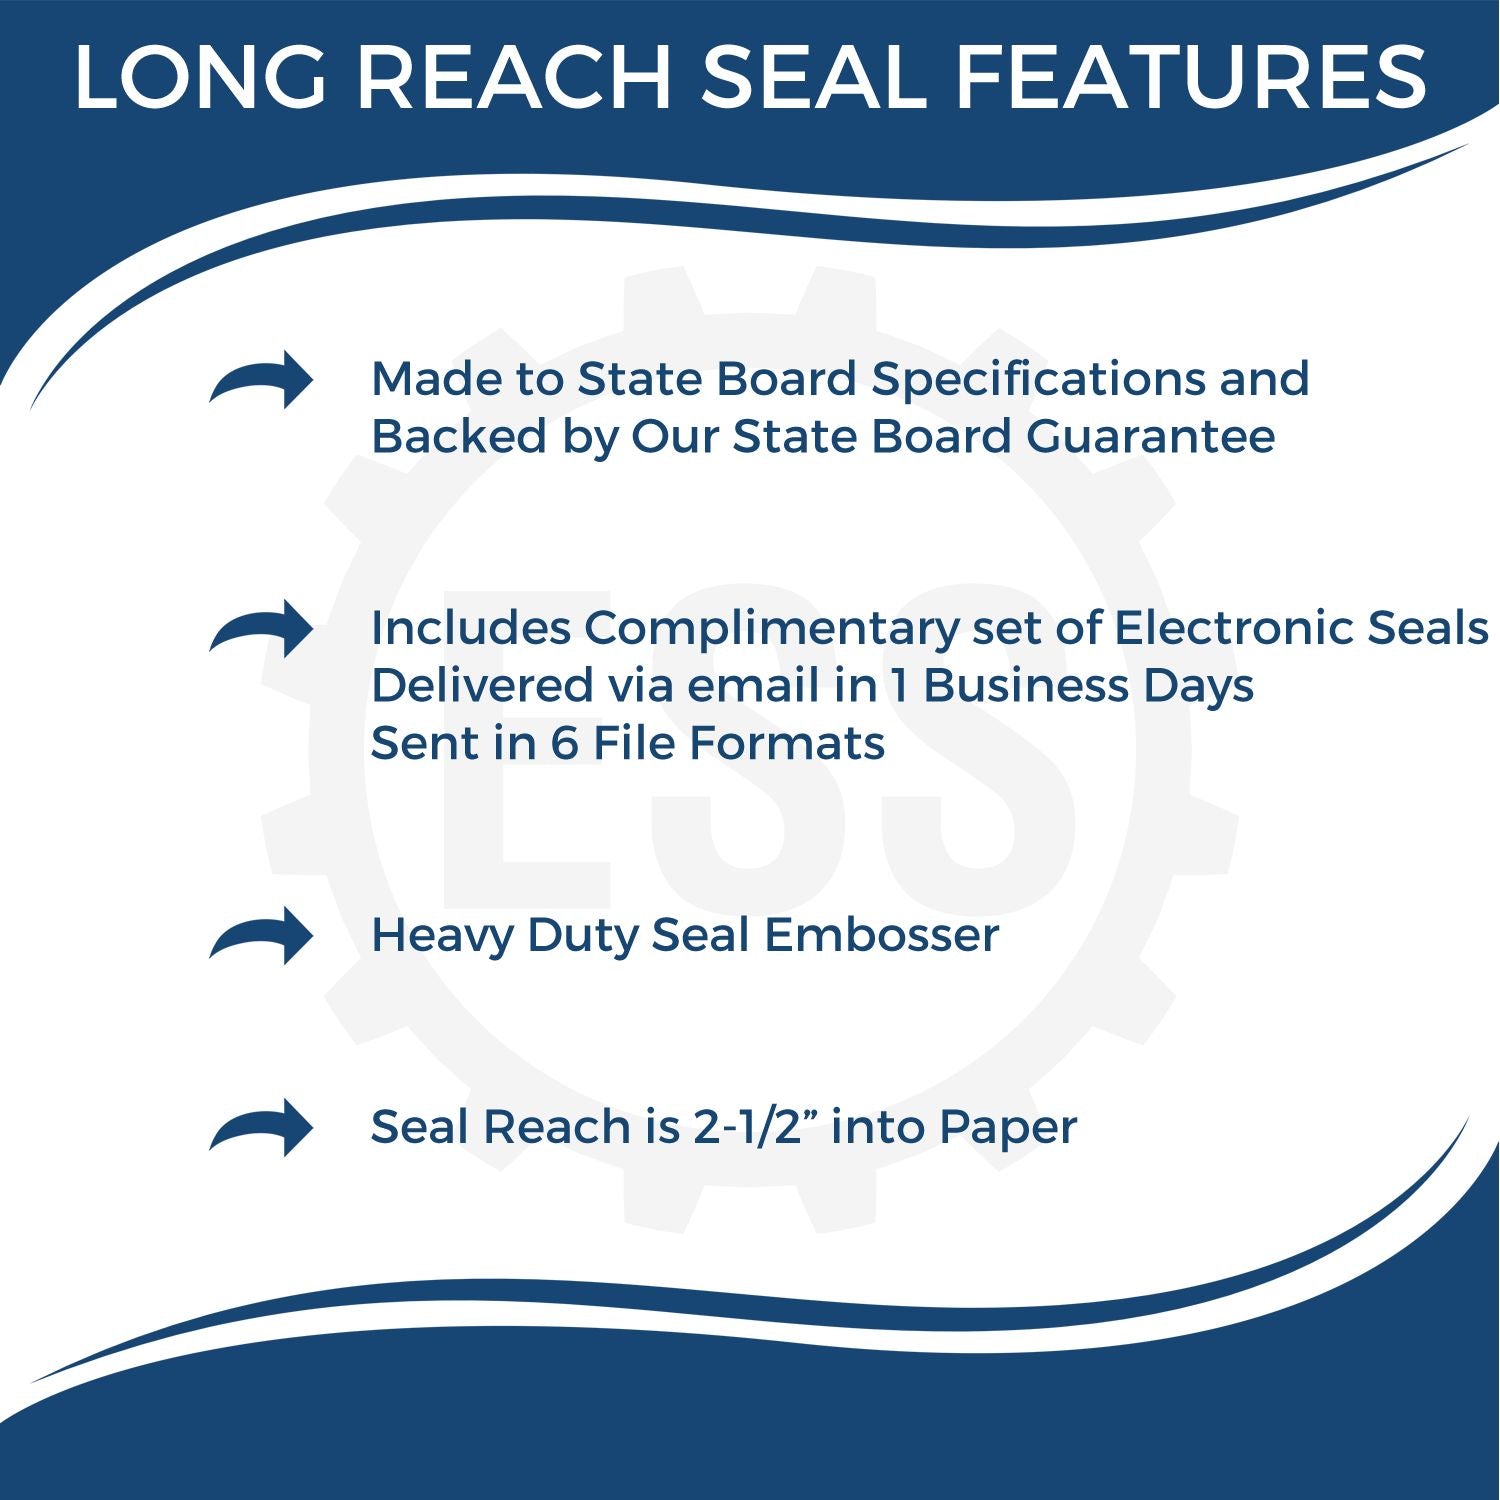 The main image for the Long Reach Maine PE Seal depicting a sample of the imprint and electronic files